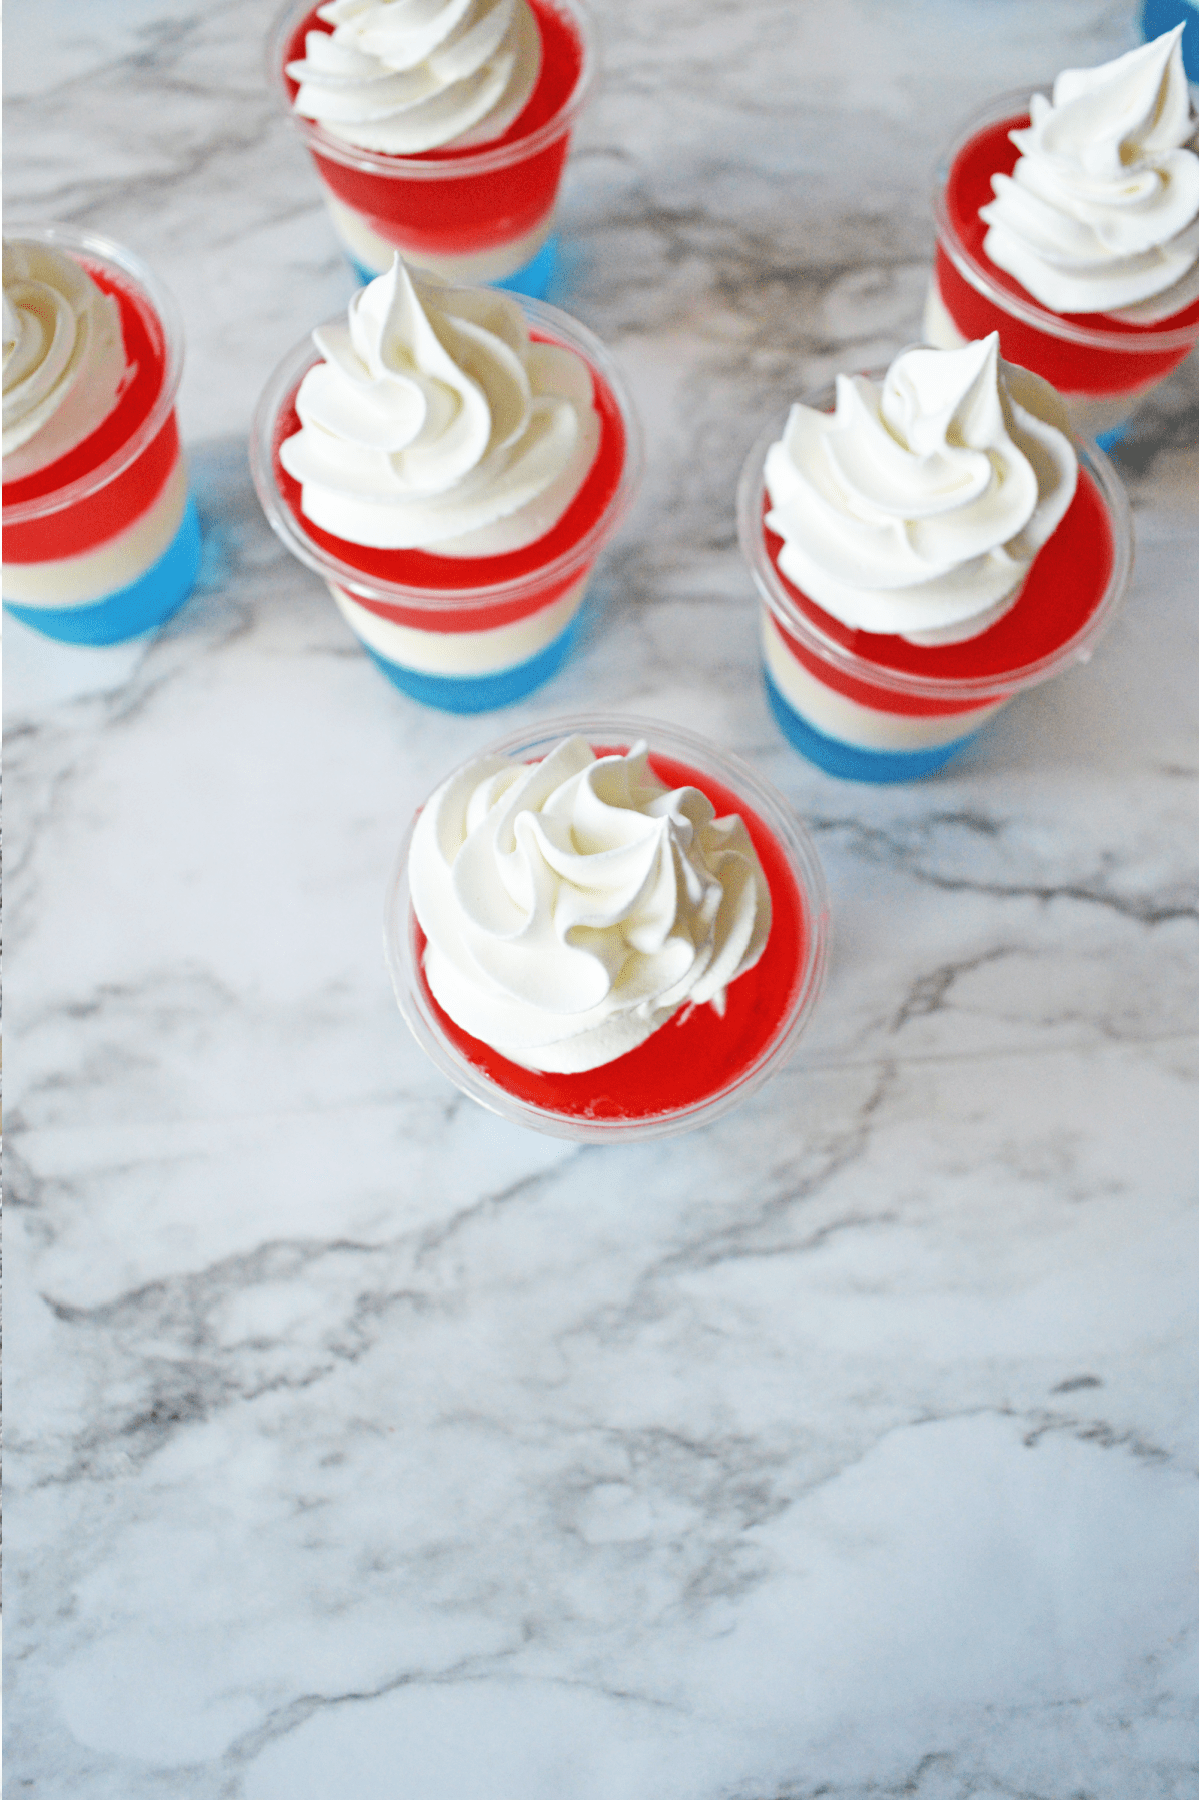 Jello shots topped with whipped cream